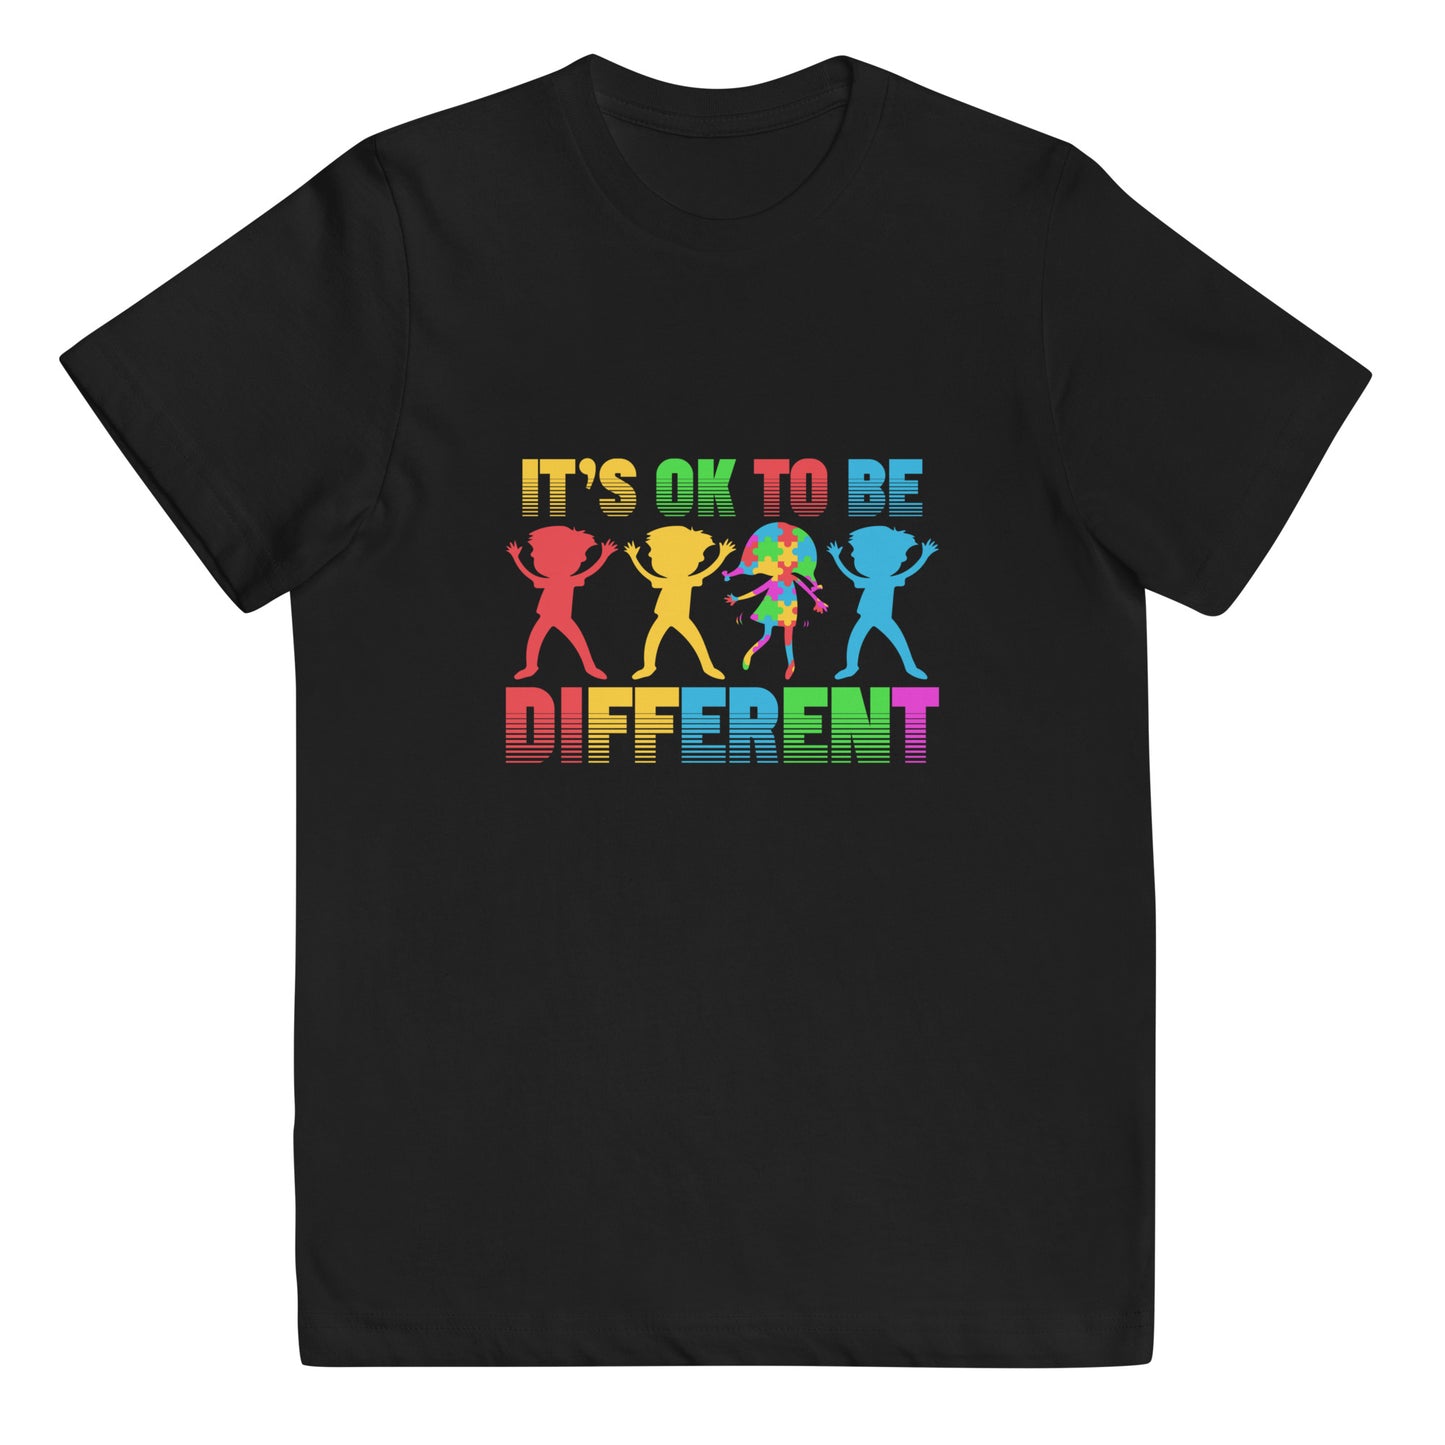 It's Ok to be Different Youth jersey t-shirt